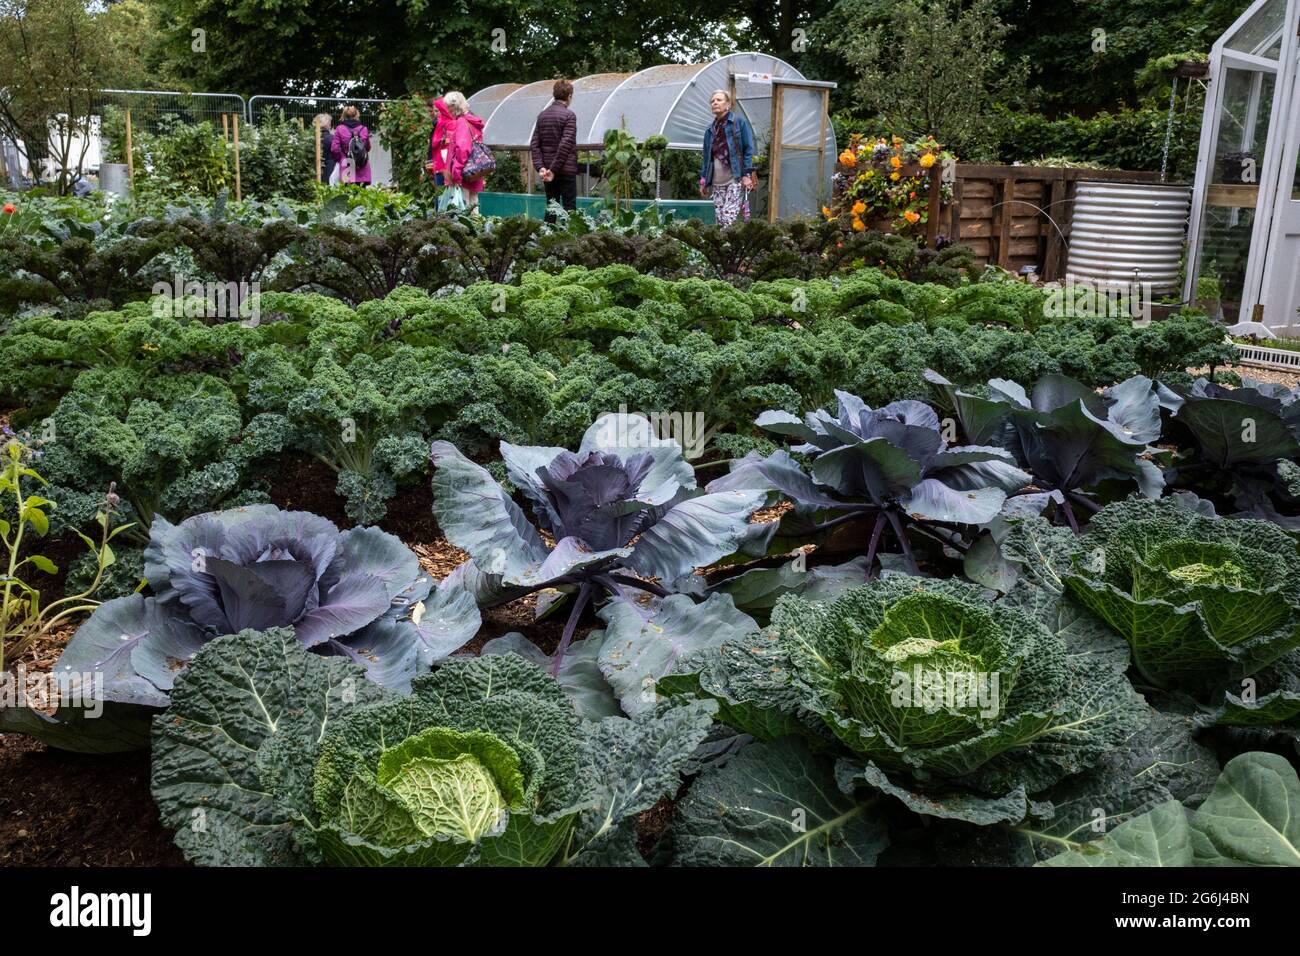 London, UK.  6 July 2021. Huge vegetables growing in the 'no dig' garden as the rescheduled RHS Hampton Court Palace Garden Festival opens to the public. No dig is a form of cultivation advocated by gardener Charles Dowding. Cancelled in 2020 due to the ongoing coronavirus pandemic, the world’s largest flower show includes gardens from inspiring designers, celebrity talks, demonstrations and workshops.  Visitors to the show are required to observe Covid-19 protocols.  Credit: Stephen Chung / Alamy Live News Stock Photo